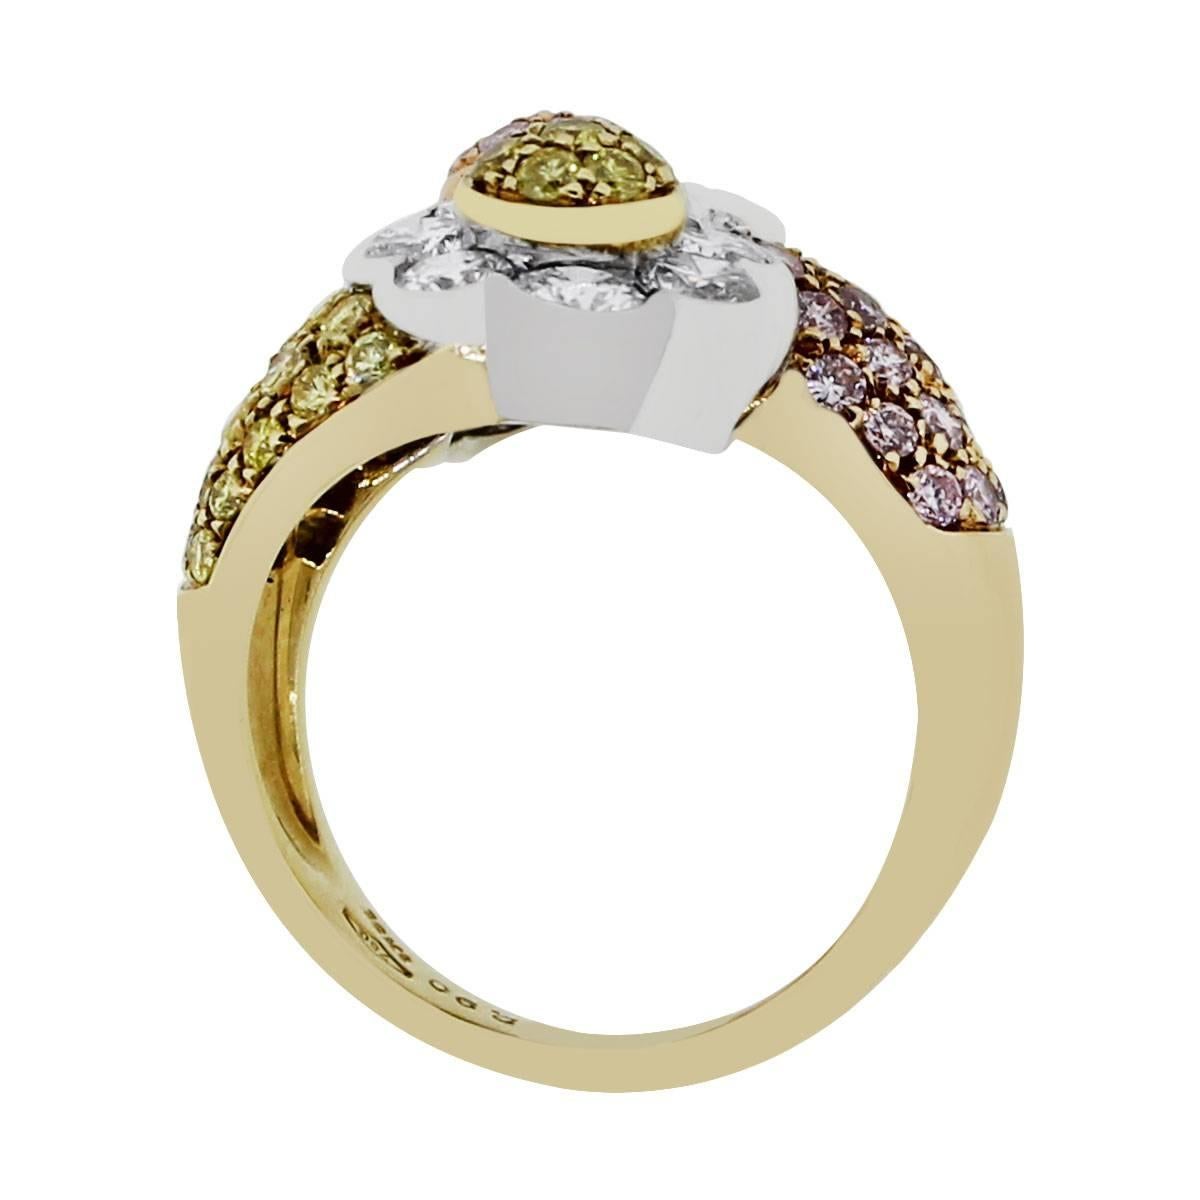 Style: Floral ring
Material: Tri color gold floral ring
Diamond Details: Approximately 2.90ctw pink, yellow and white round brilliant cut non treated diamonds.
Ring Size: 6.5 (can be sized)
Ring Measurements: 0.75″ x 0.70″ x 1″
Total Weight: 11.1g